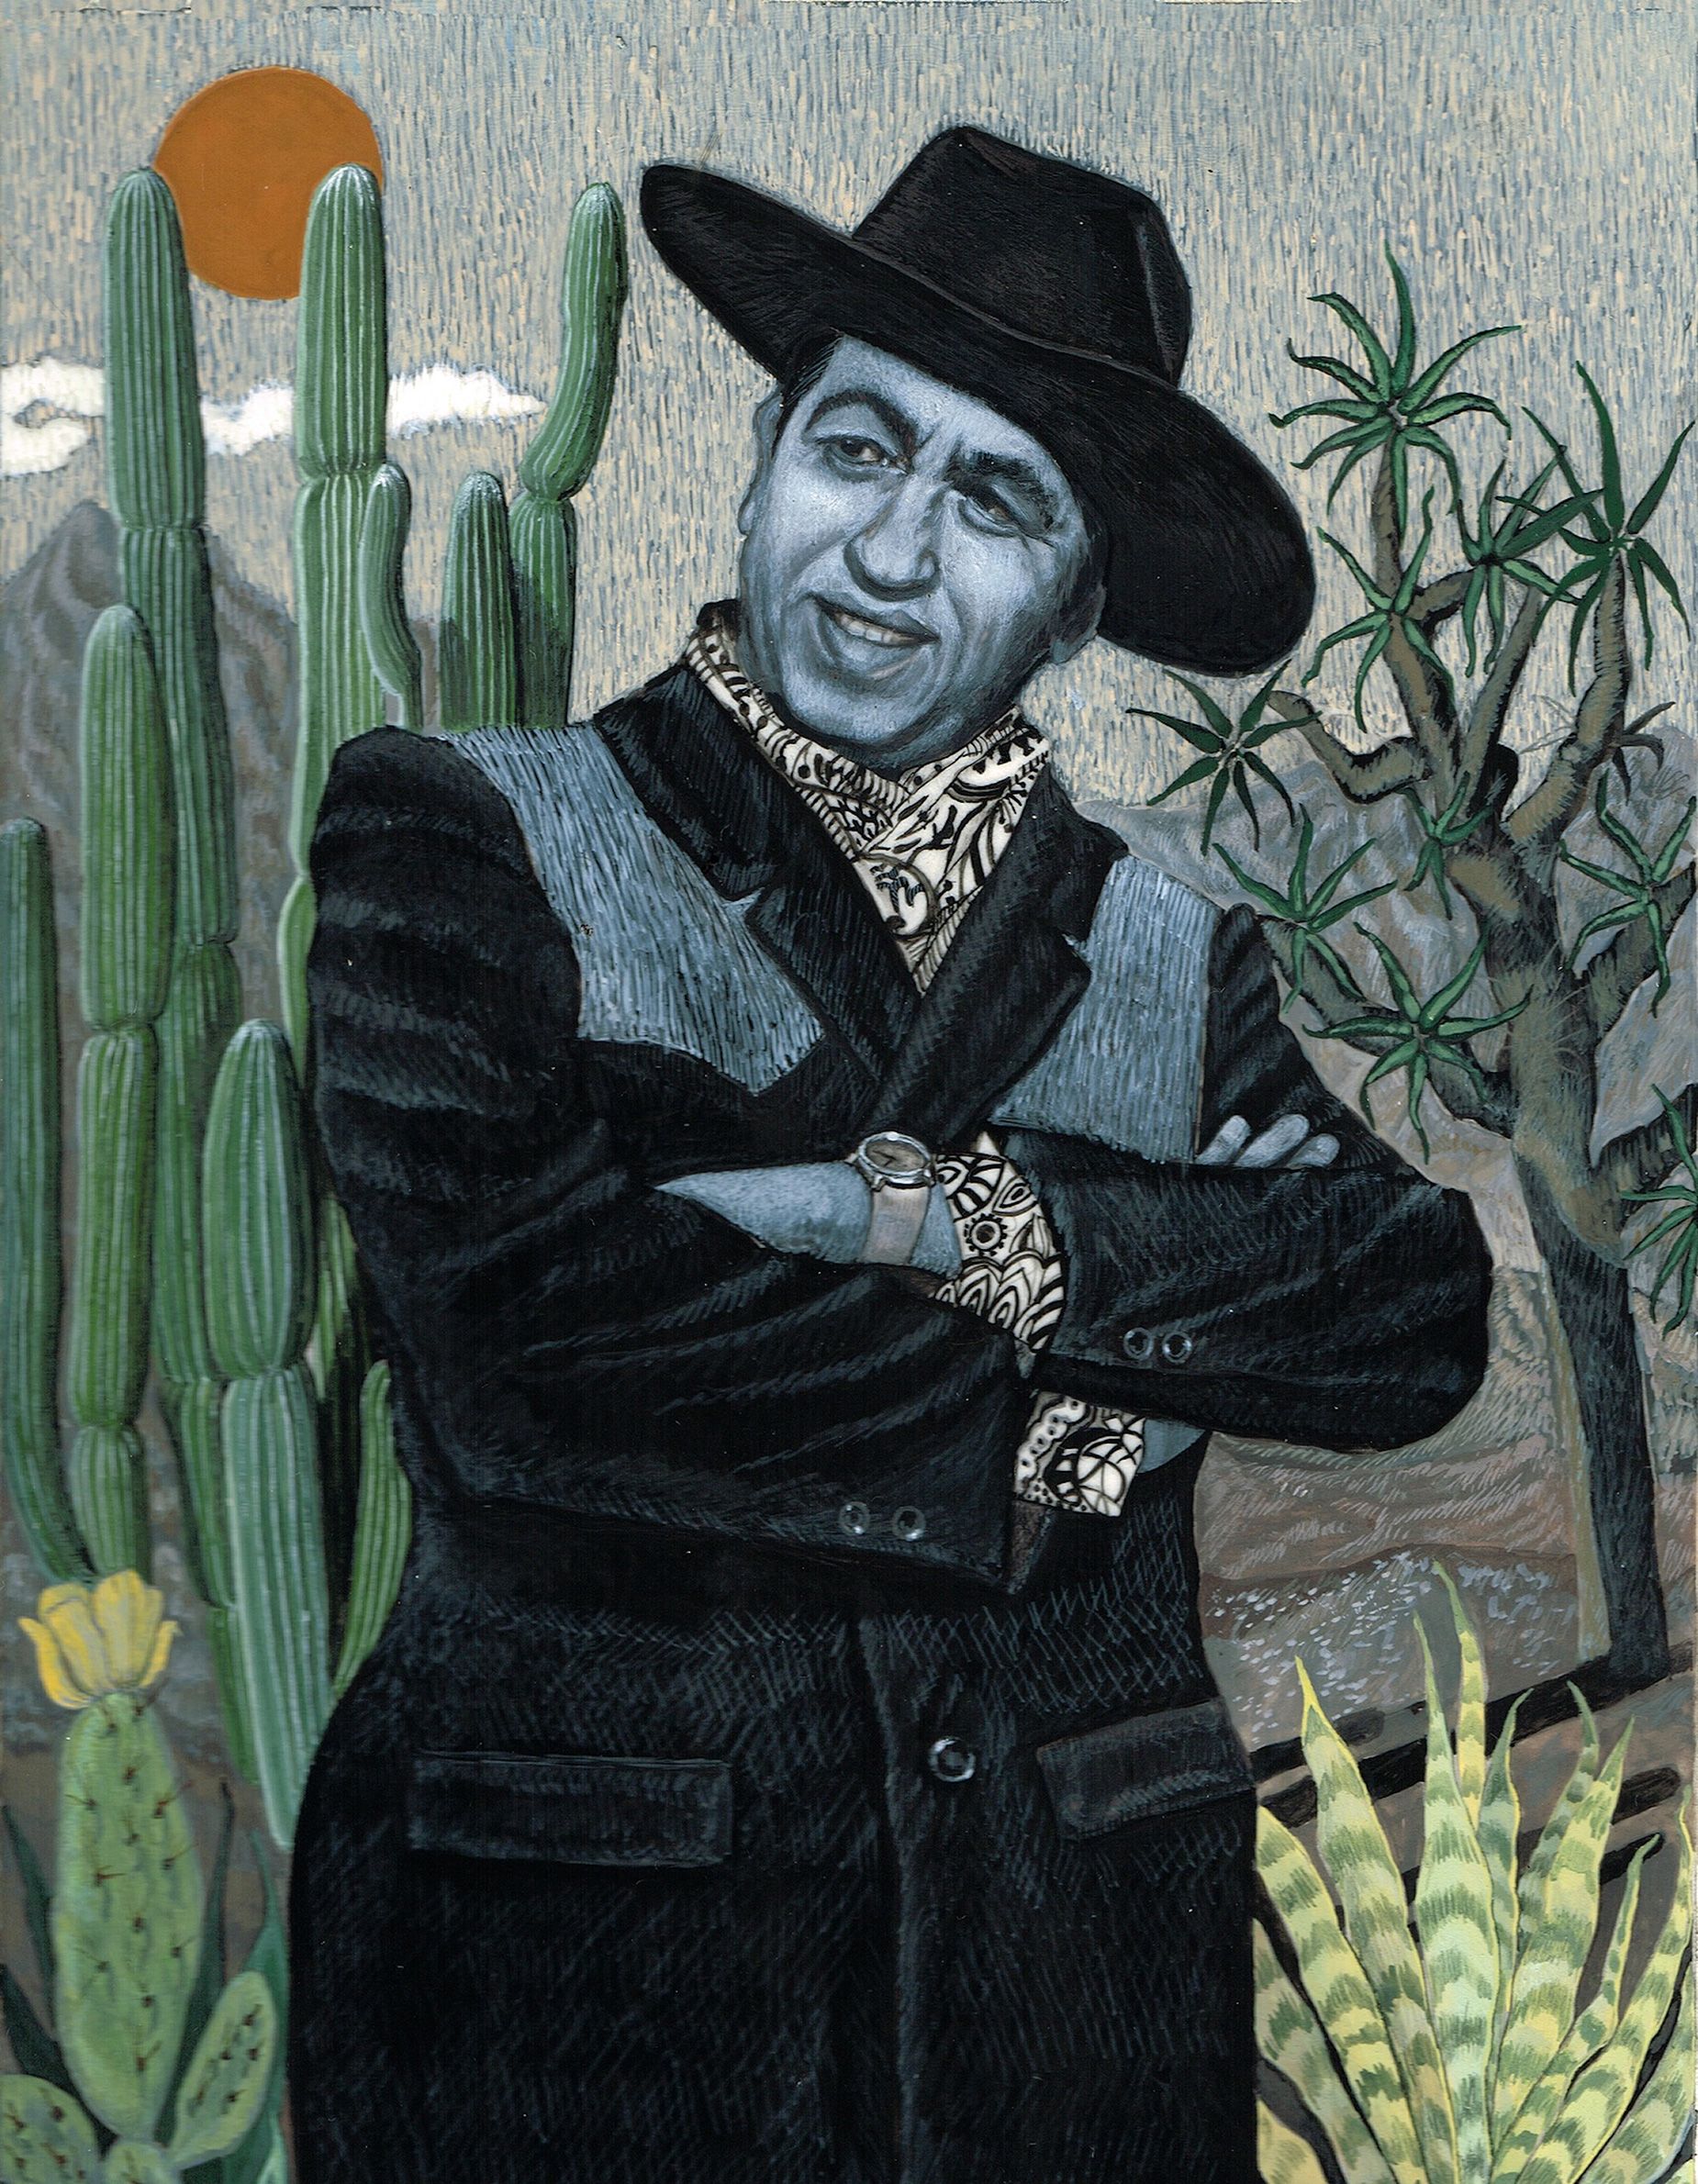 Gardens also feature often in Sokhanvari's work, as here in "Cowboy Ali" (2015).